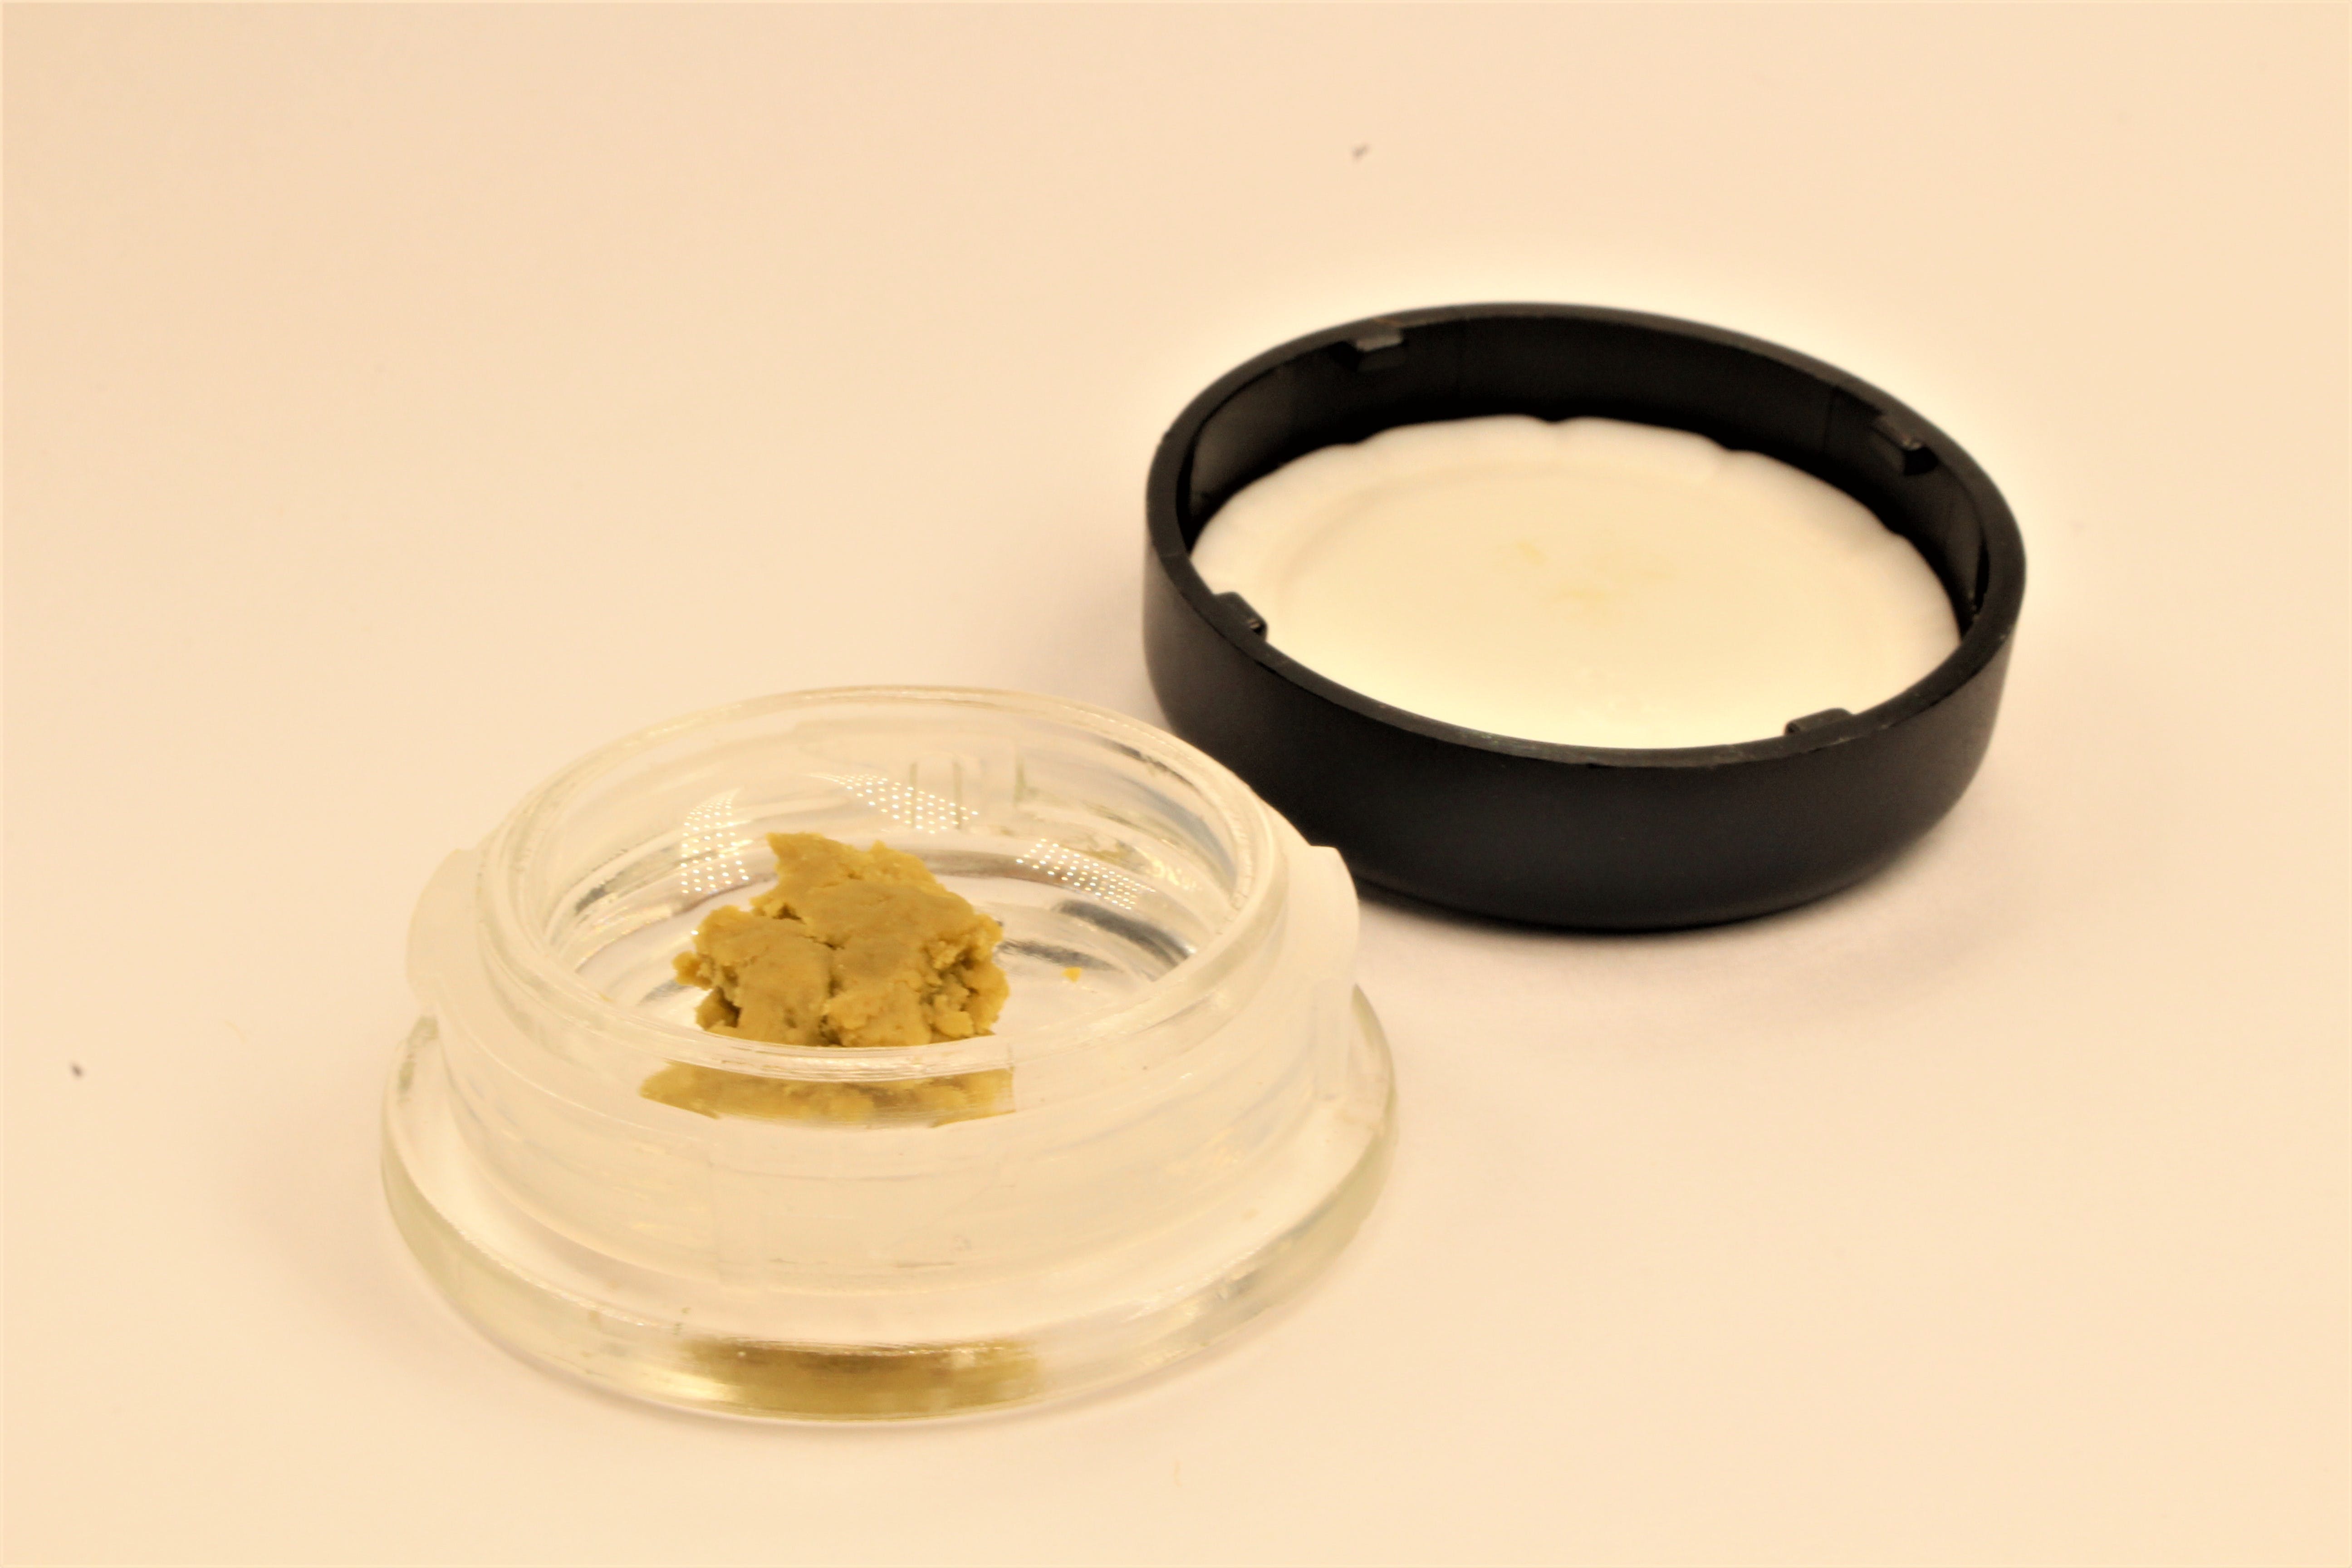 concentrate-daddys-pearls-5g-rosin